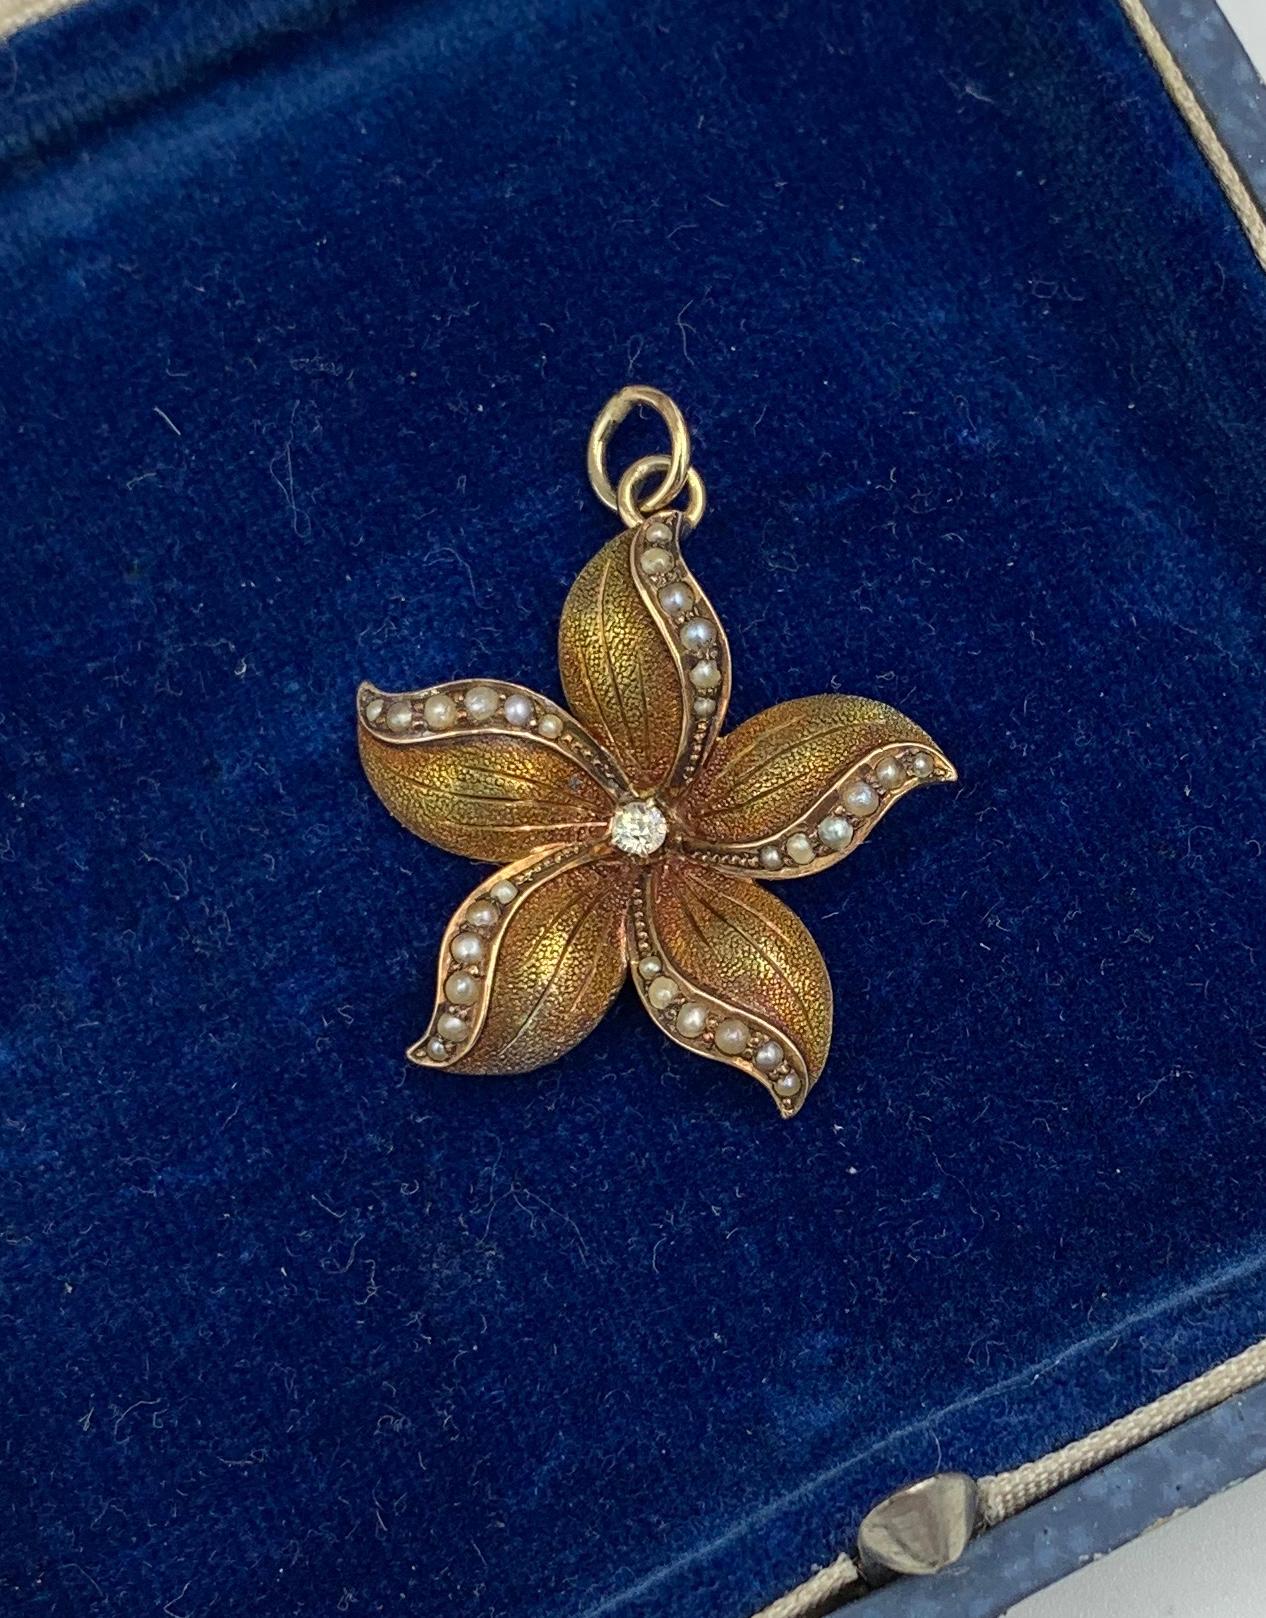 A VICTORIAN - ART NOUVEAU PENDANT OR CHARM IN THE FORM OF A FLOWER - SO STUNNING WITH THE MOST WONDERFUL THREE DIMENSIONAL DEPICTION OF THE FLOWER.   THE GOLD WORK IS OF THE HIGHEST QUALITY AND SET WITH A RADIANT ANTIQUE OLD MINE CUT DIAMOND OF